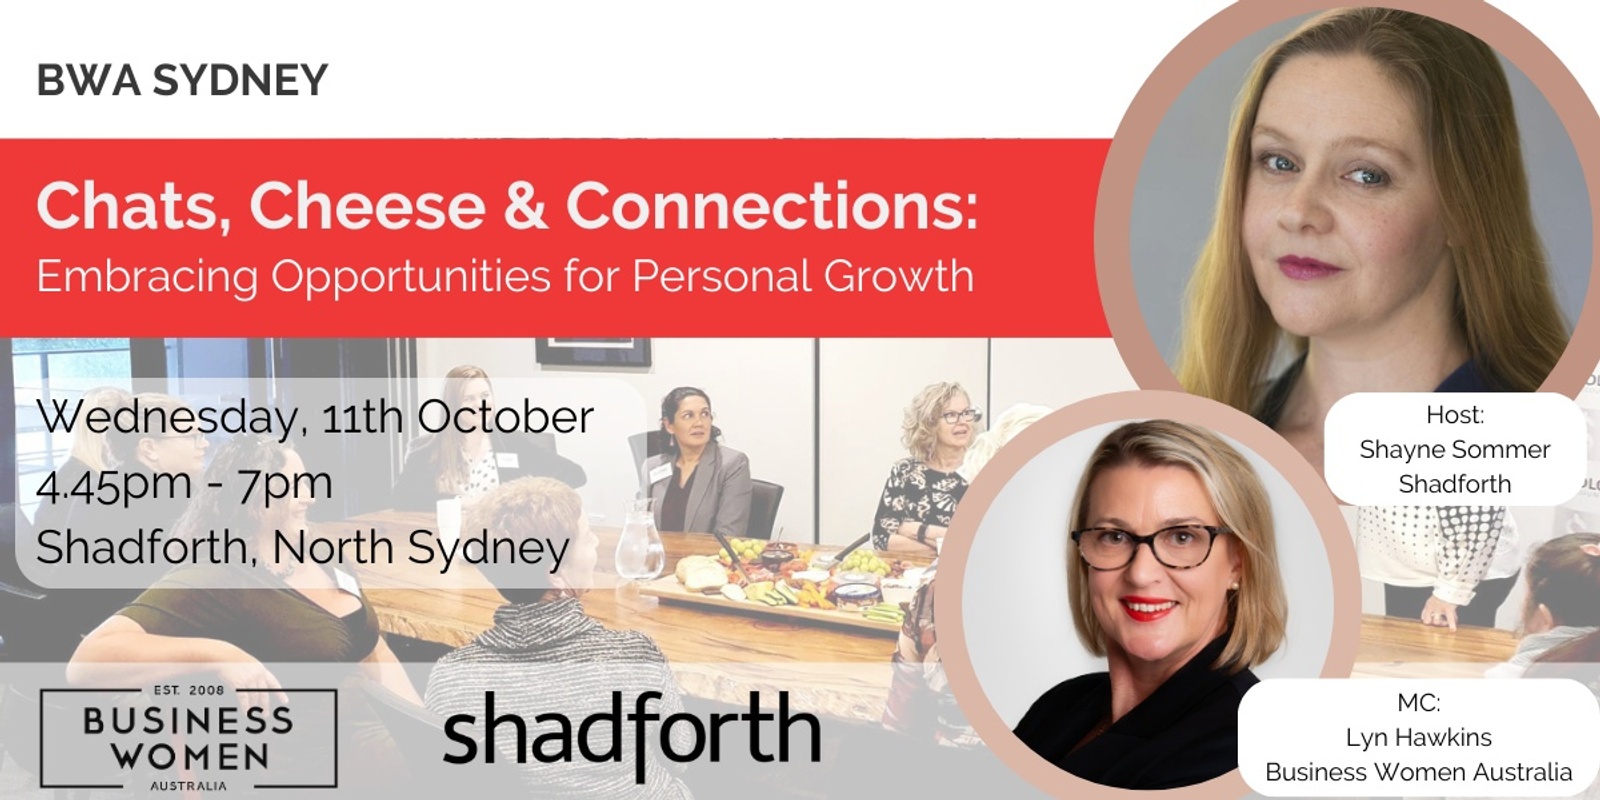 Banner image for BWA Sydney: Chats, Cheese & Connections - Embracing Opportunities for Personal Growth